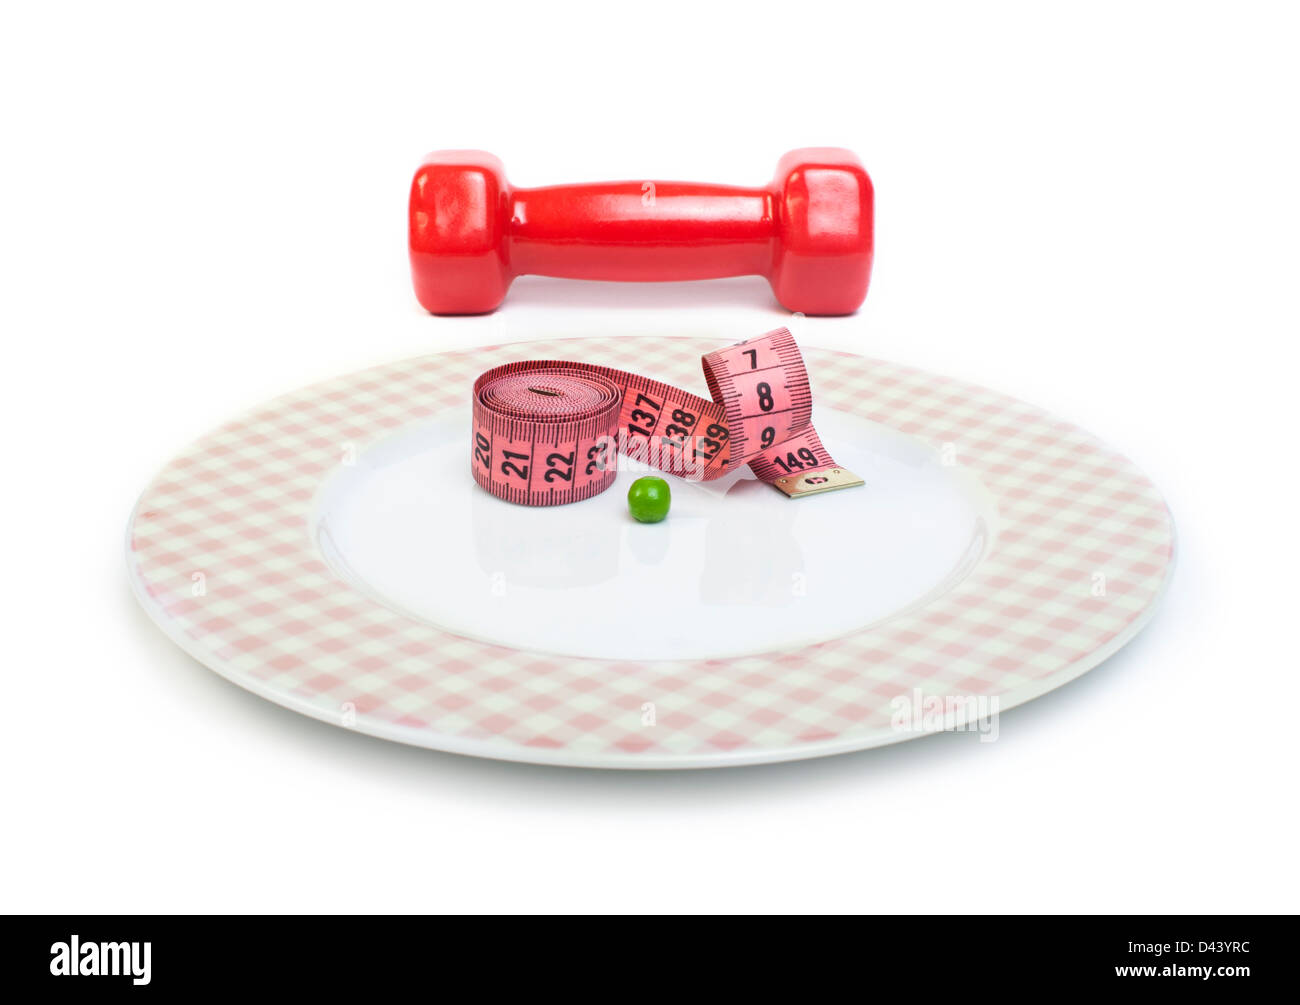 Plate with one peas. Dumbbell and centimeter measure. Studio shot Stock Photo